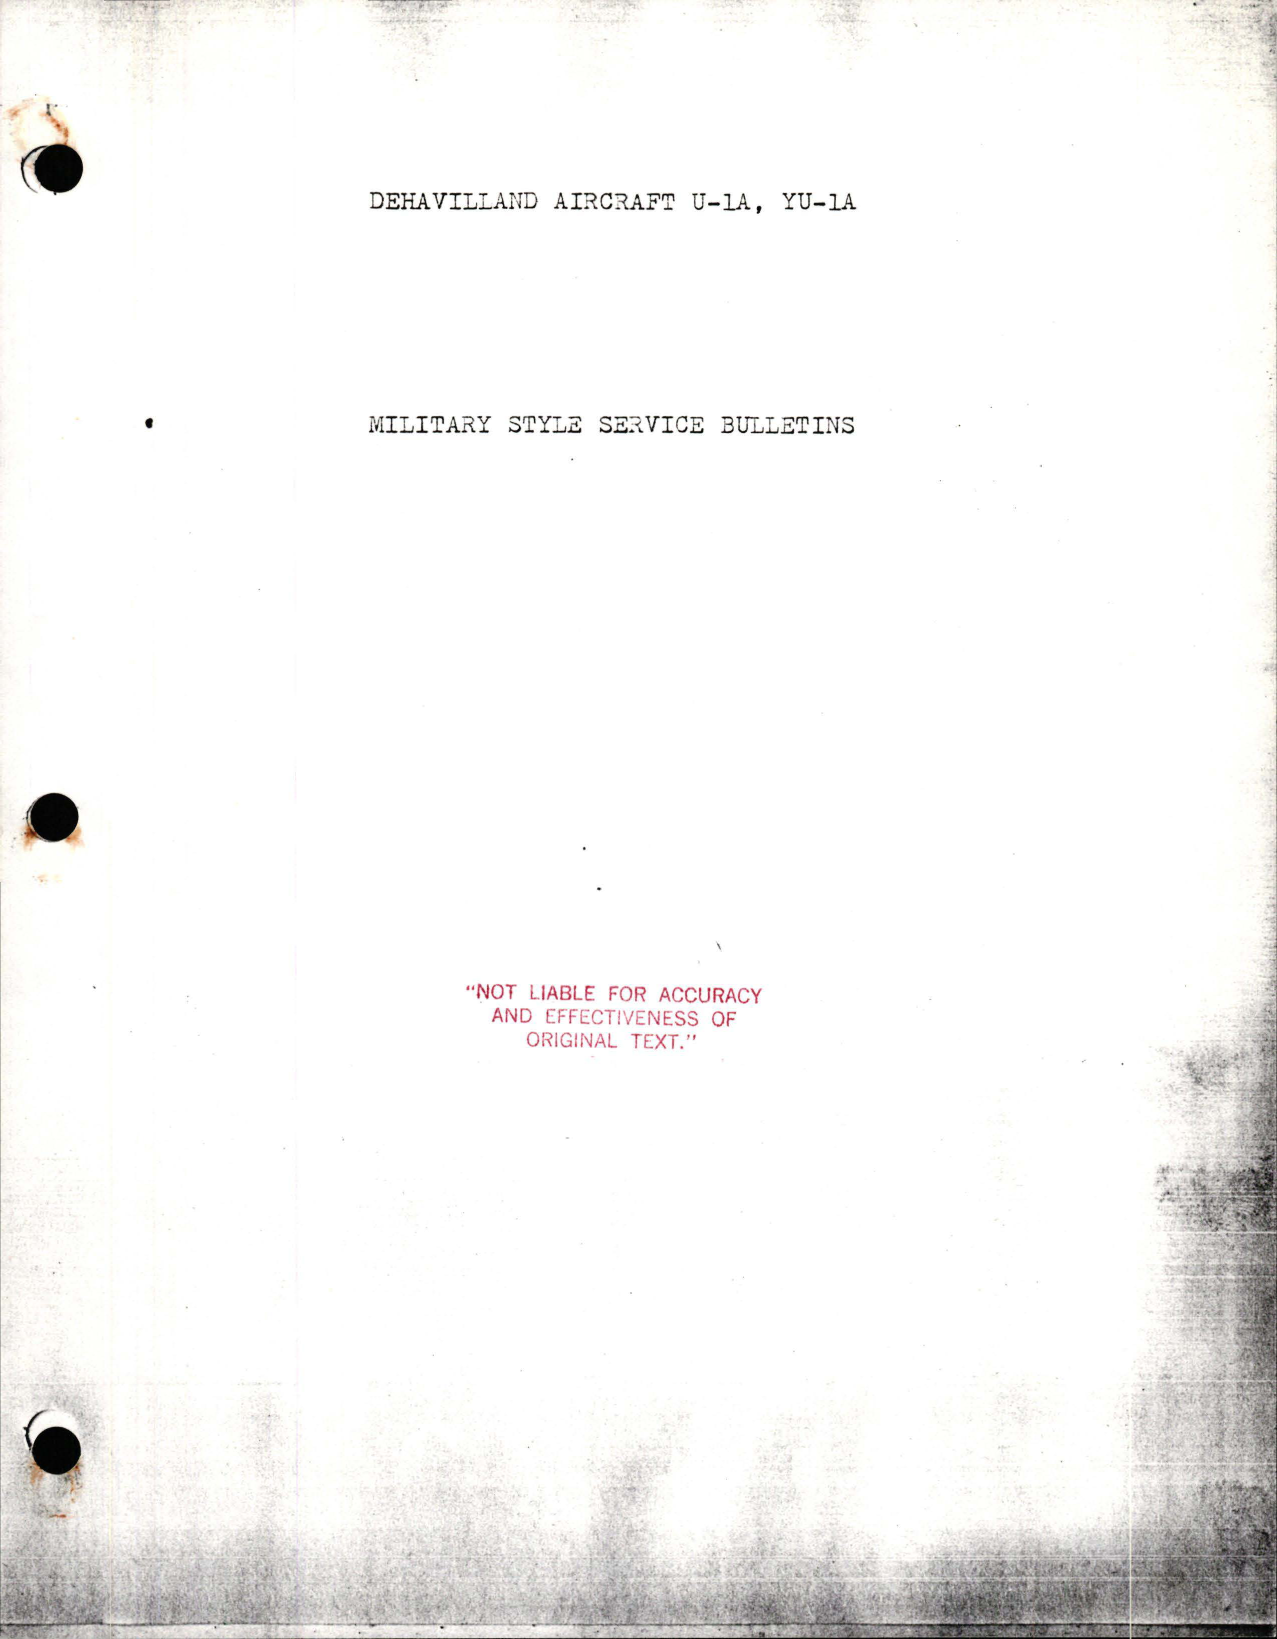 Sample page 1 from AirCorps Library document: List of Military Style Service Bulletins for de Havilland U-1A and YU-1A